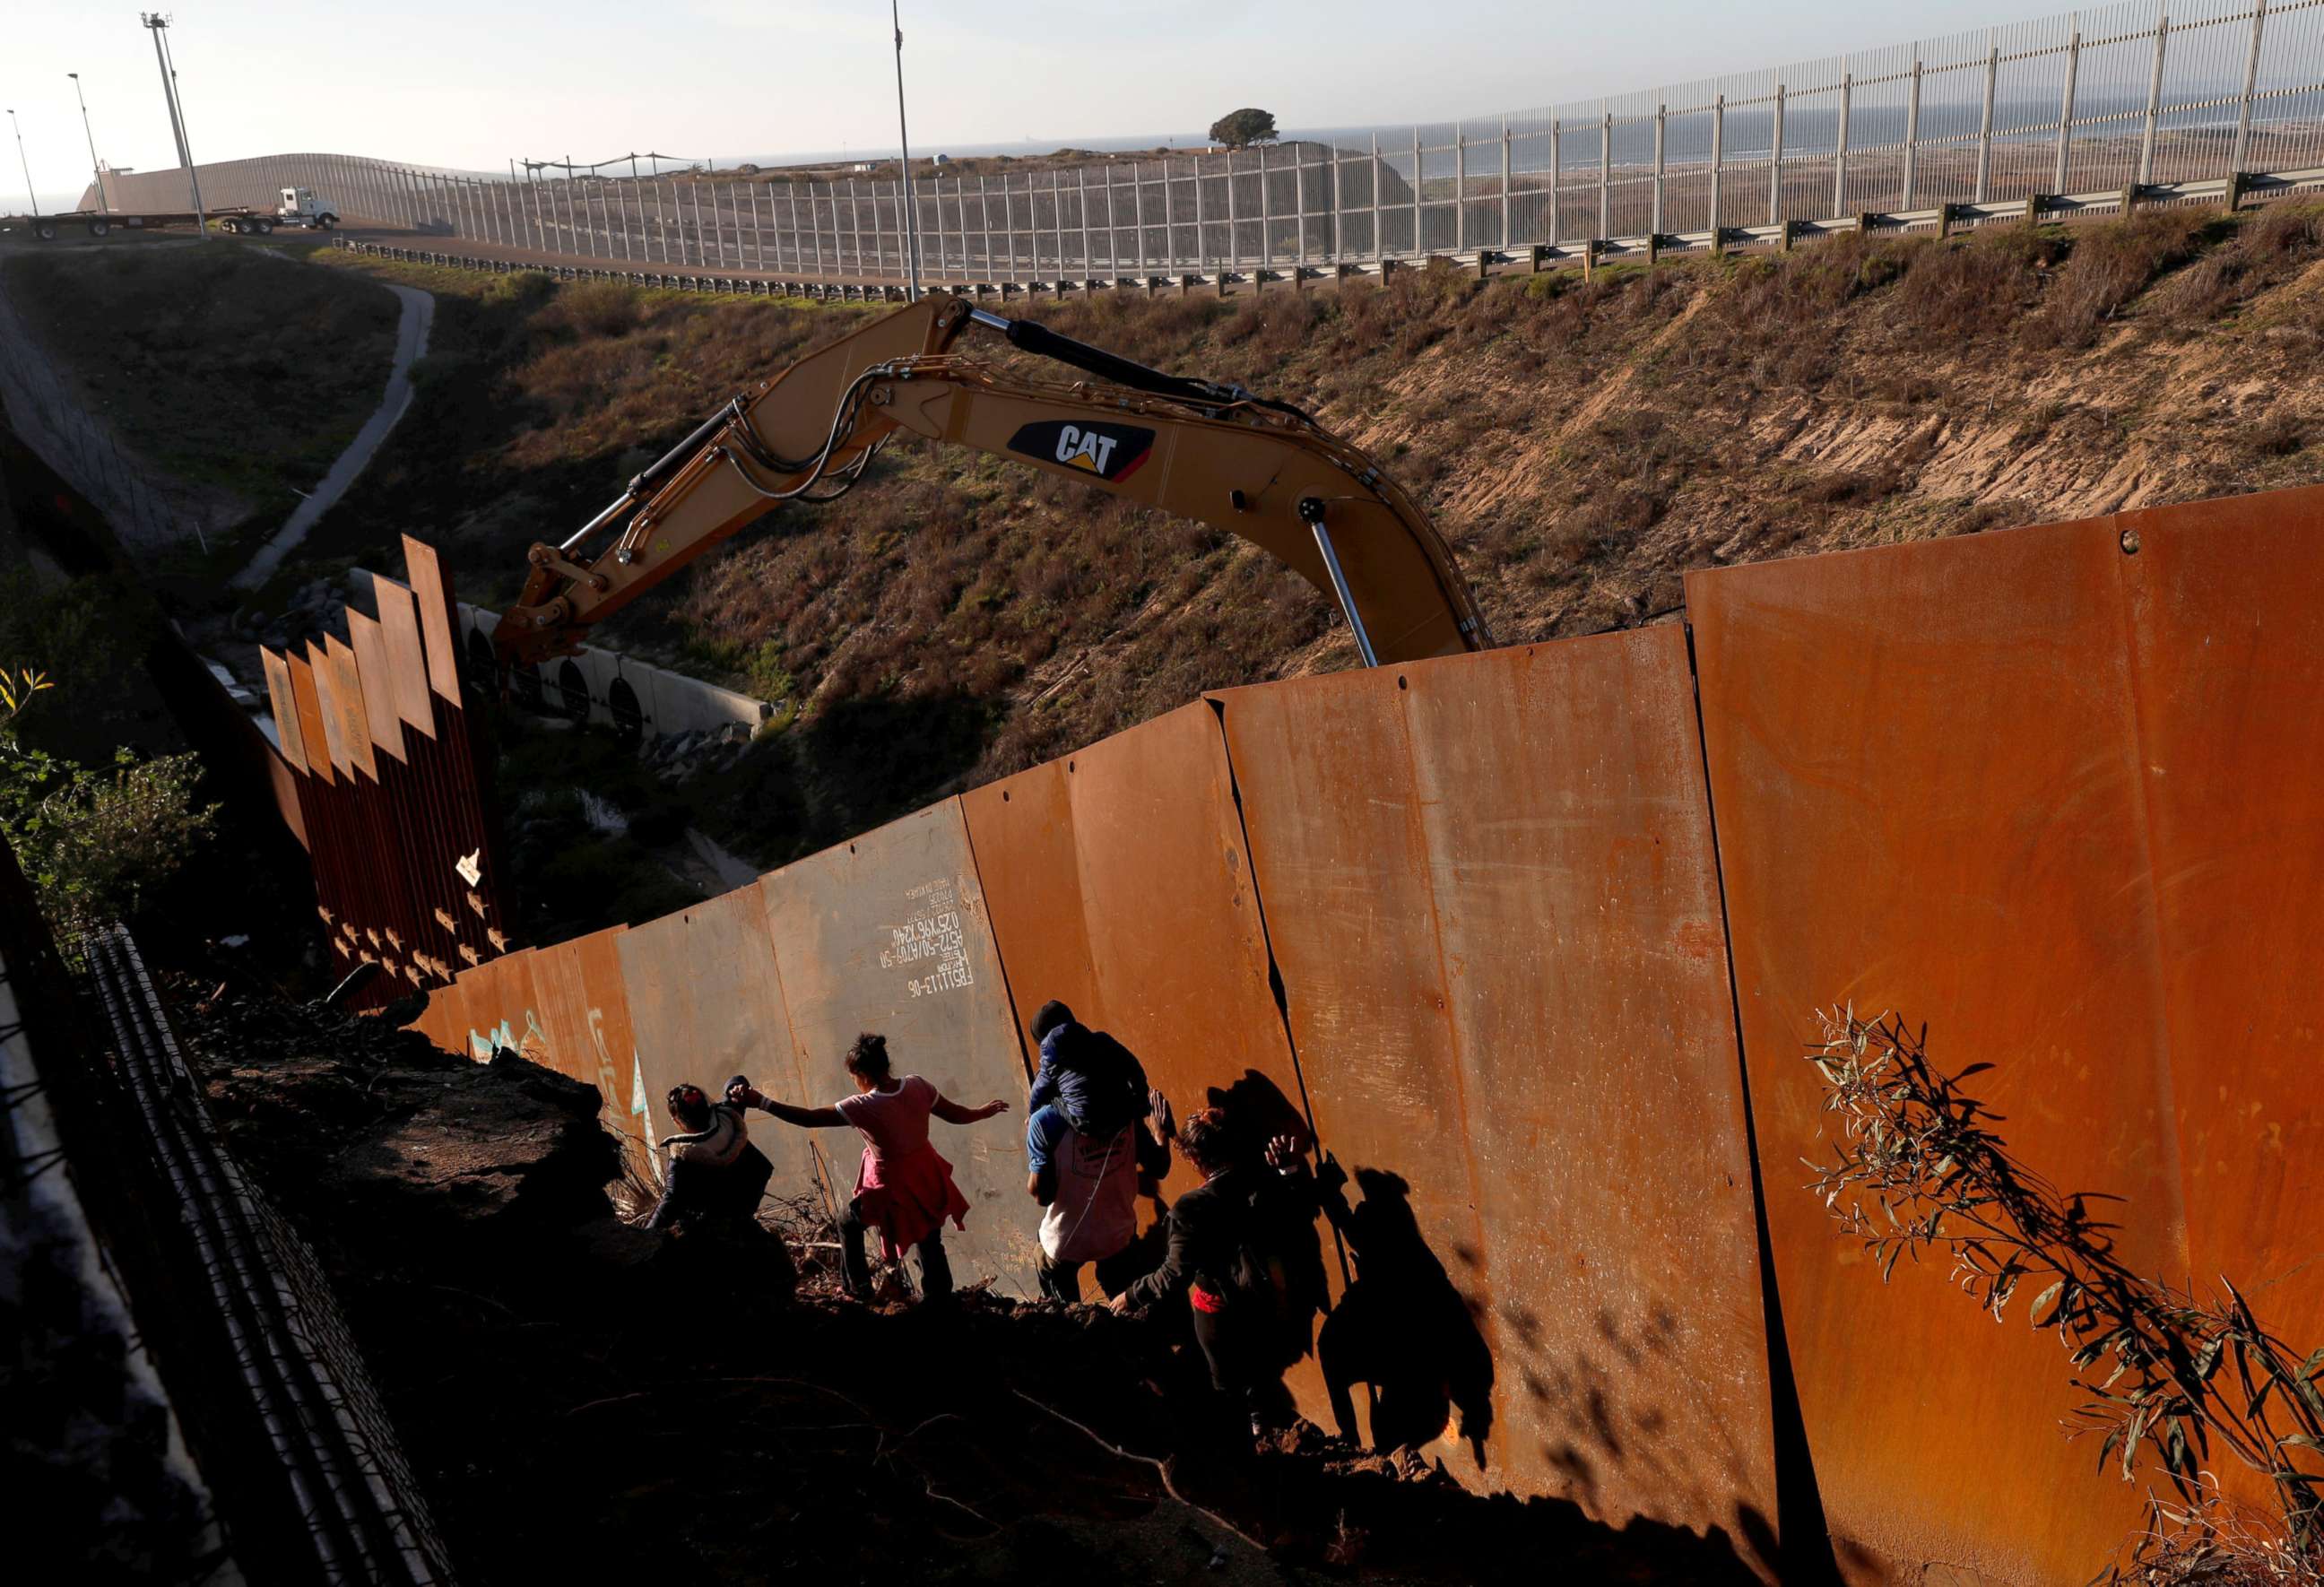 PHOTO: Migrants, part of a caravan of thousands from Central America trying to reach the U.S., climb down a steep hill after giving up on trying to climb the border wall into the U.S. from Tijuana, Mexico, Dec. 13, 2018.